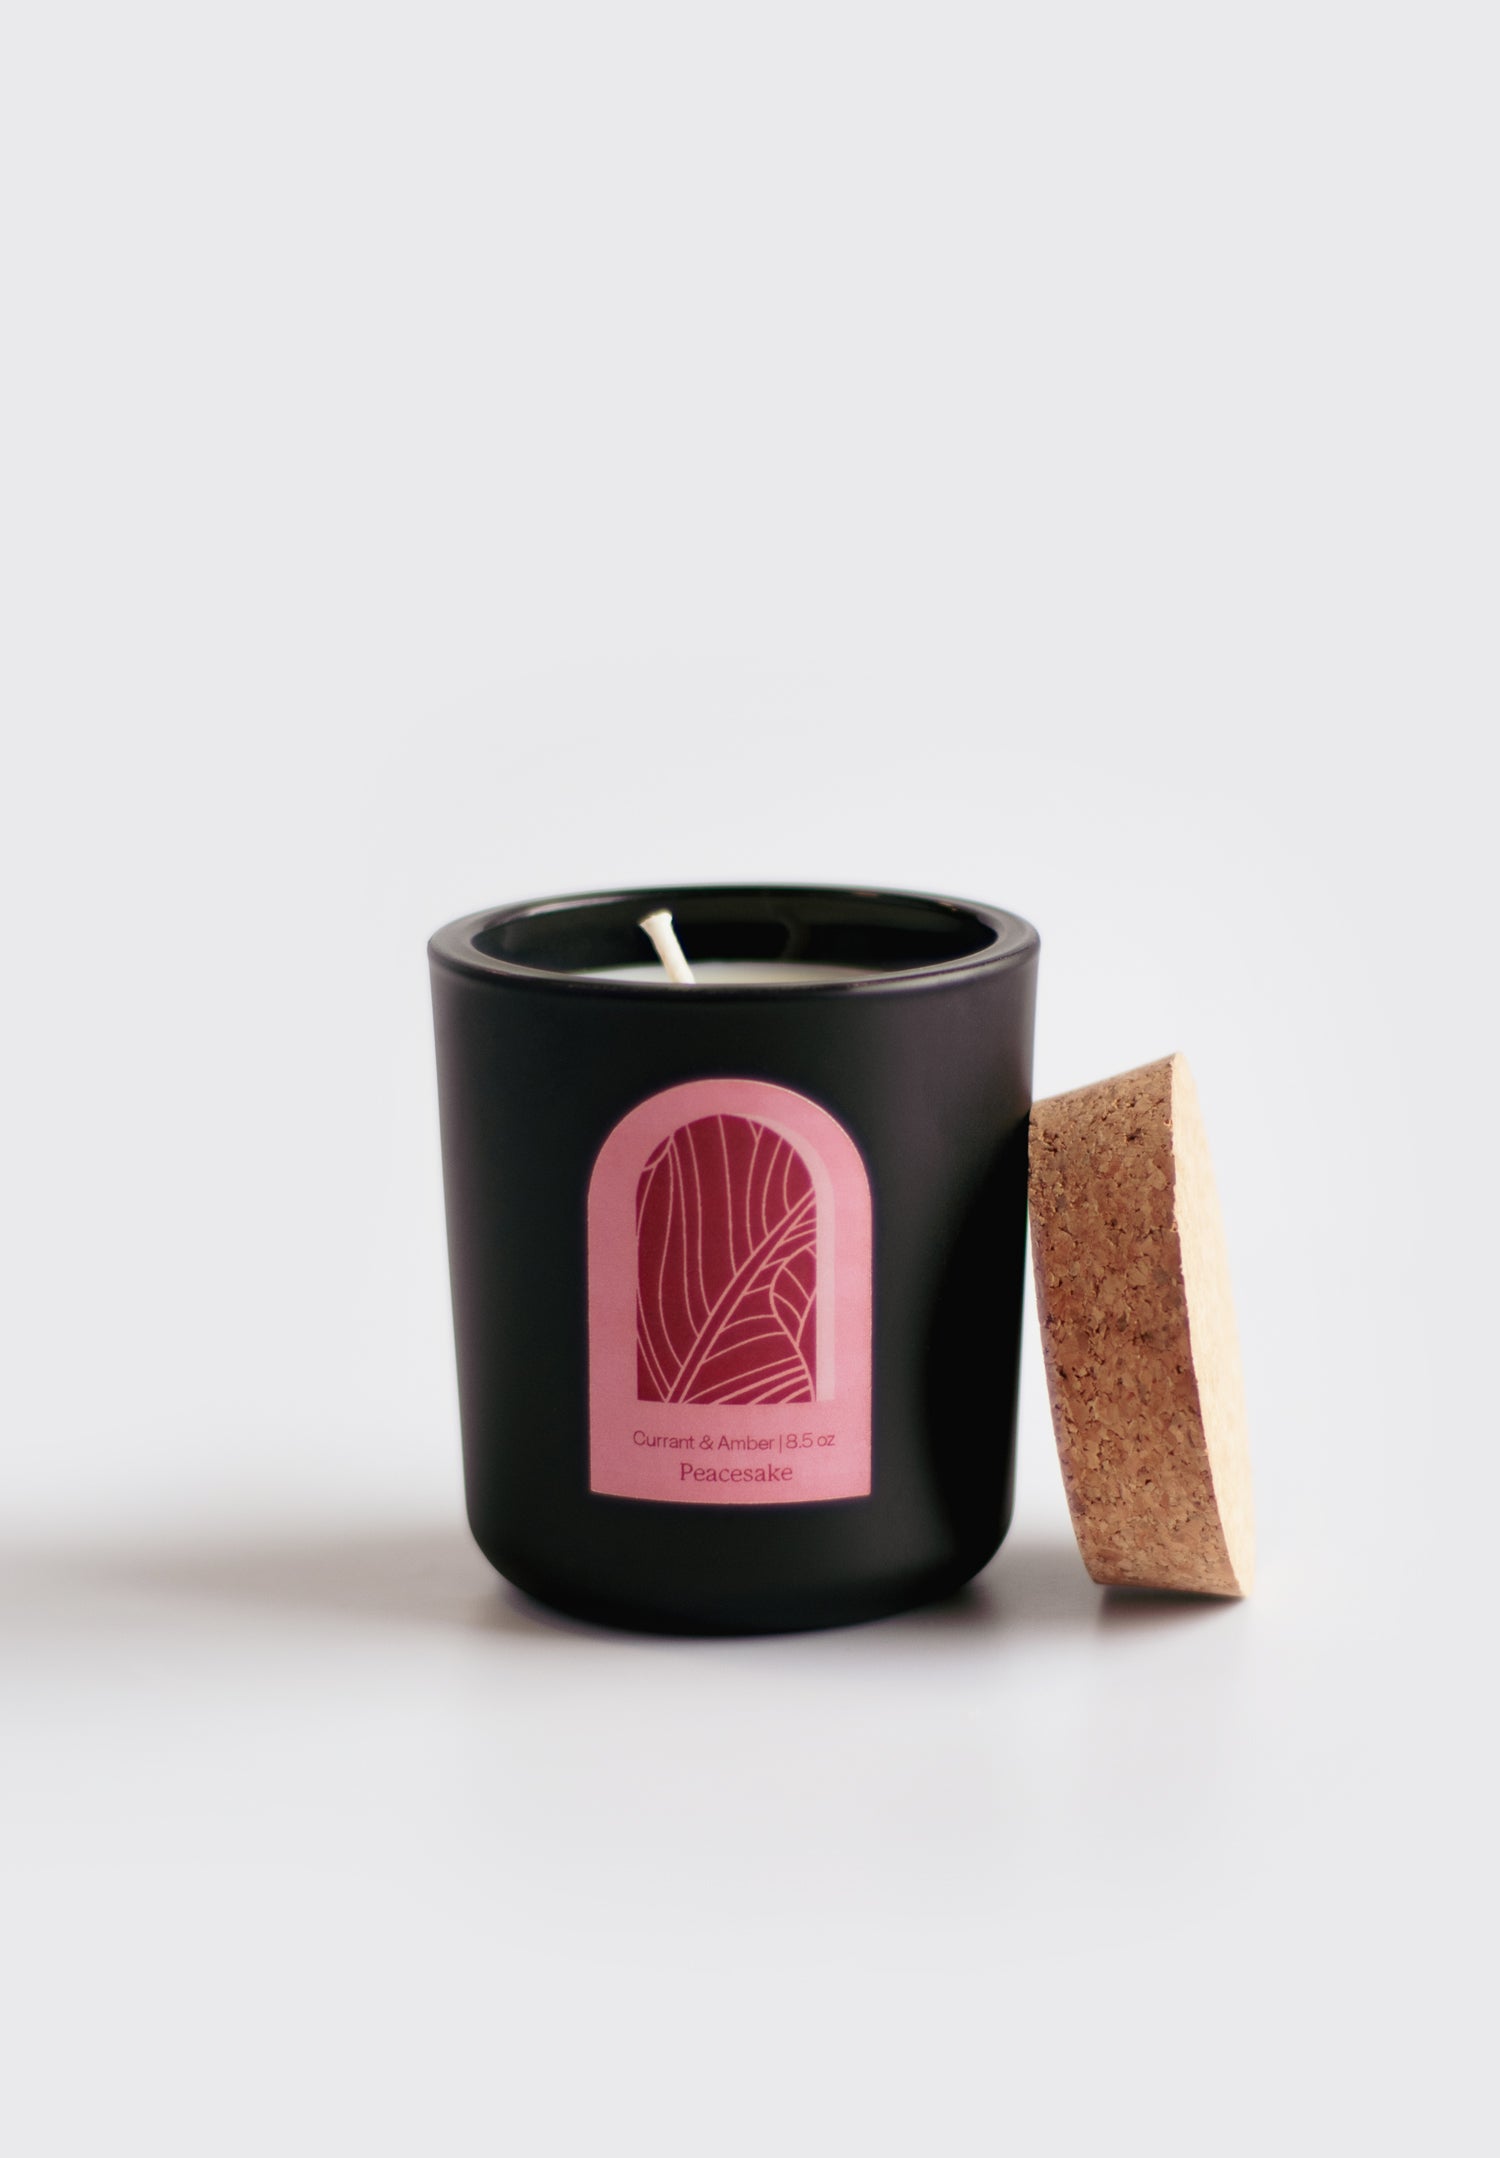 Midnight Amber Glow 3-Wick Candle